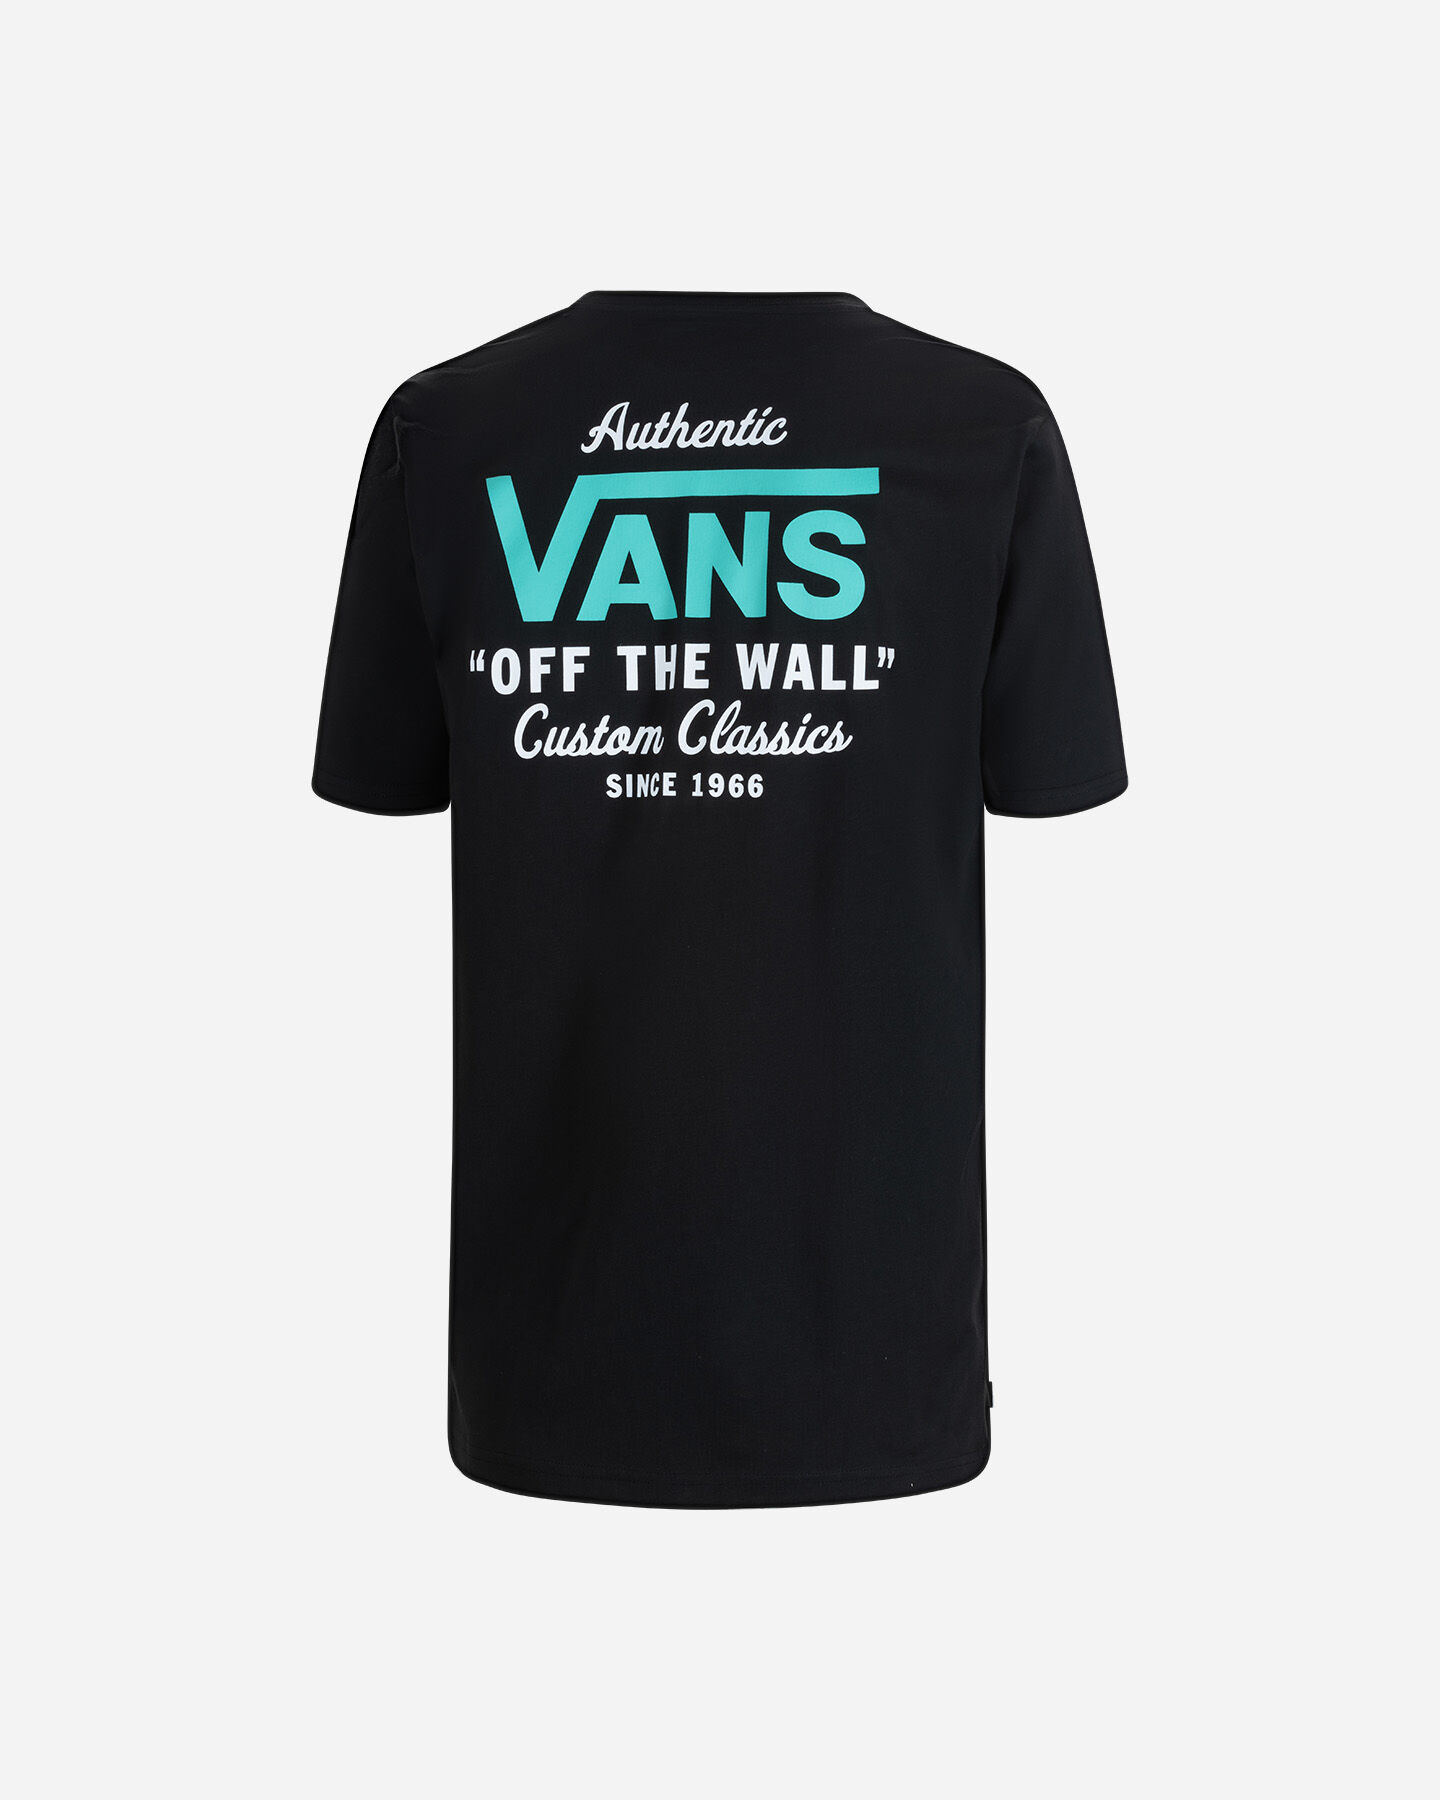  T-Shirt VANS OFF THE WALL M S5556243|BVD|XS scatto 1